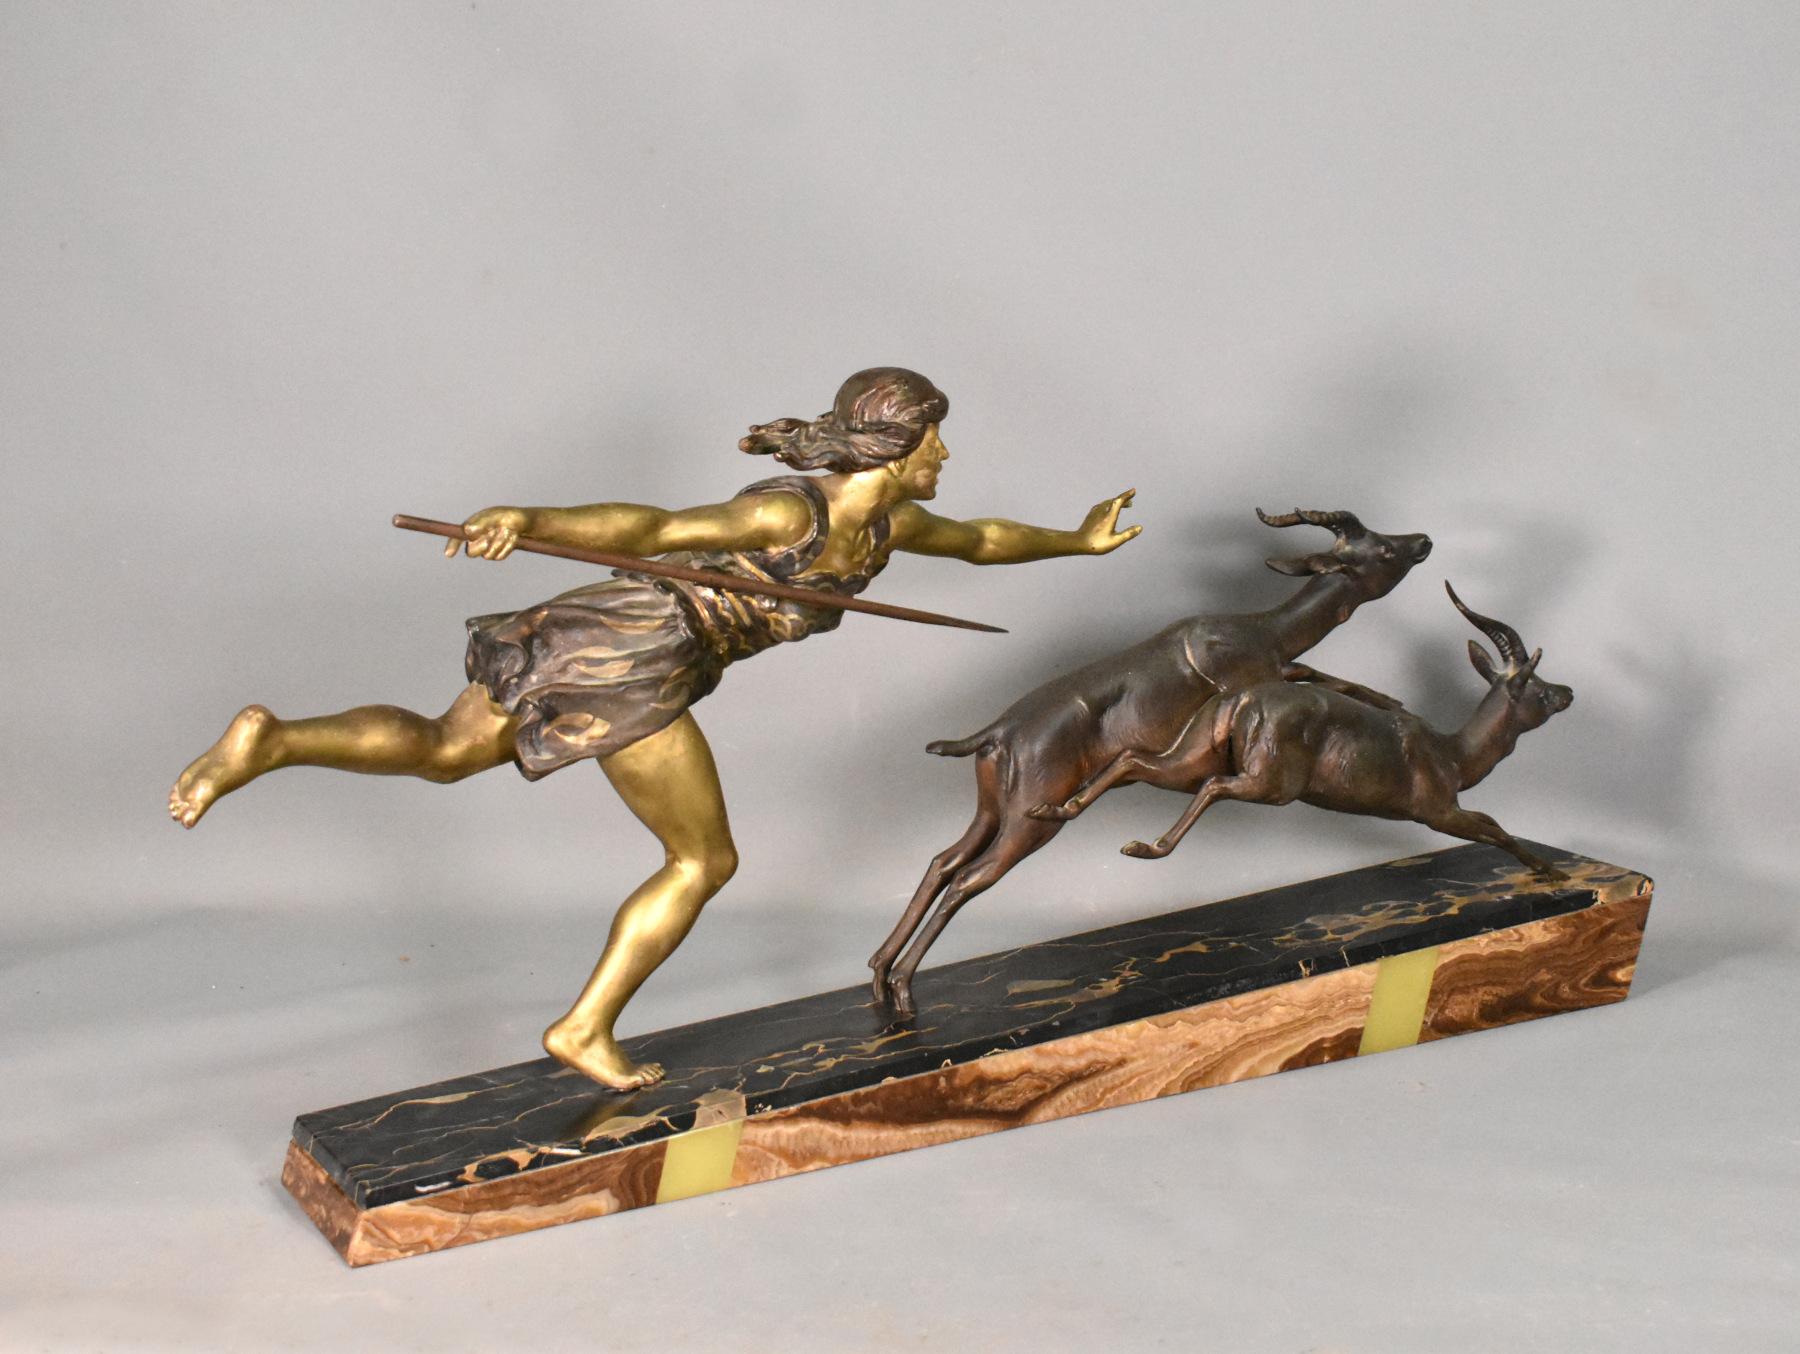 Cold-Painted Large Art Deco Sculpture Diana the Huntress by Carlier